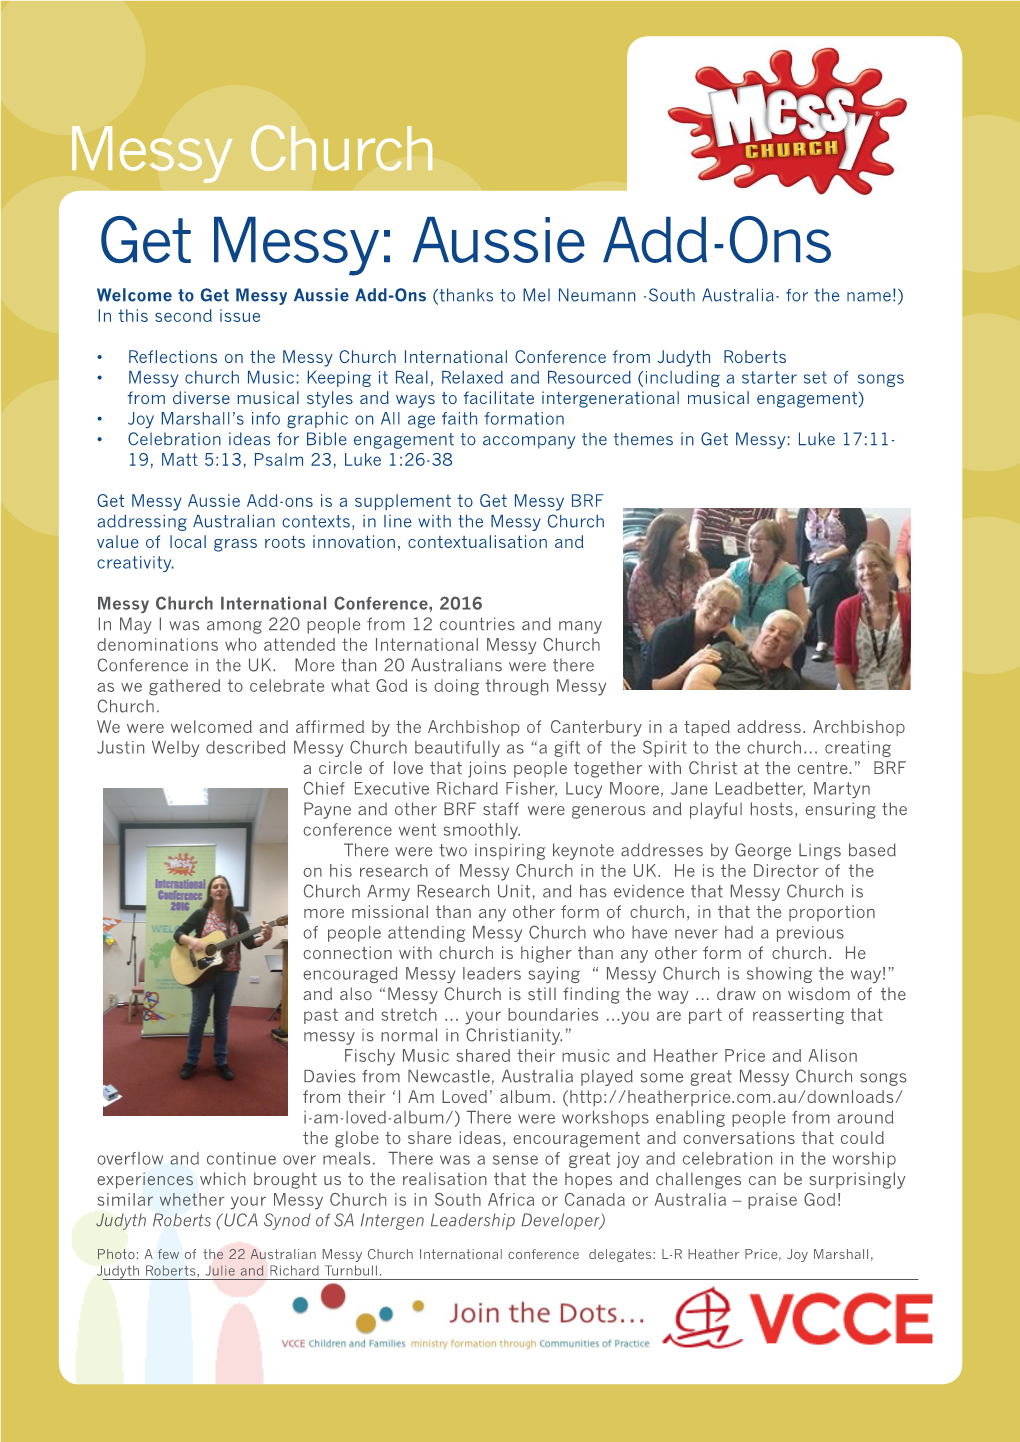 Aussie Add-Ons Welcome to Get Messy Aussie Add-Ons (Thanks to Mel Neumann -South Australia- for the Name!) in This Second Issue